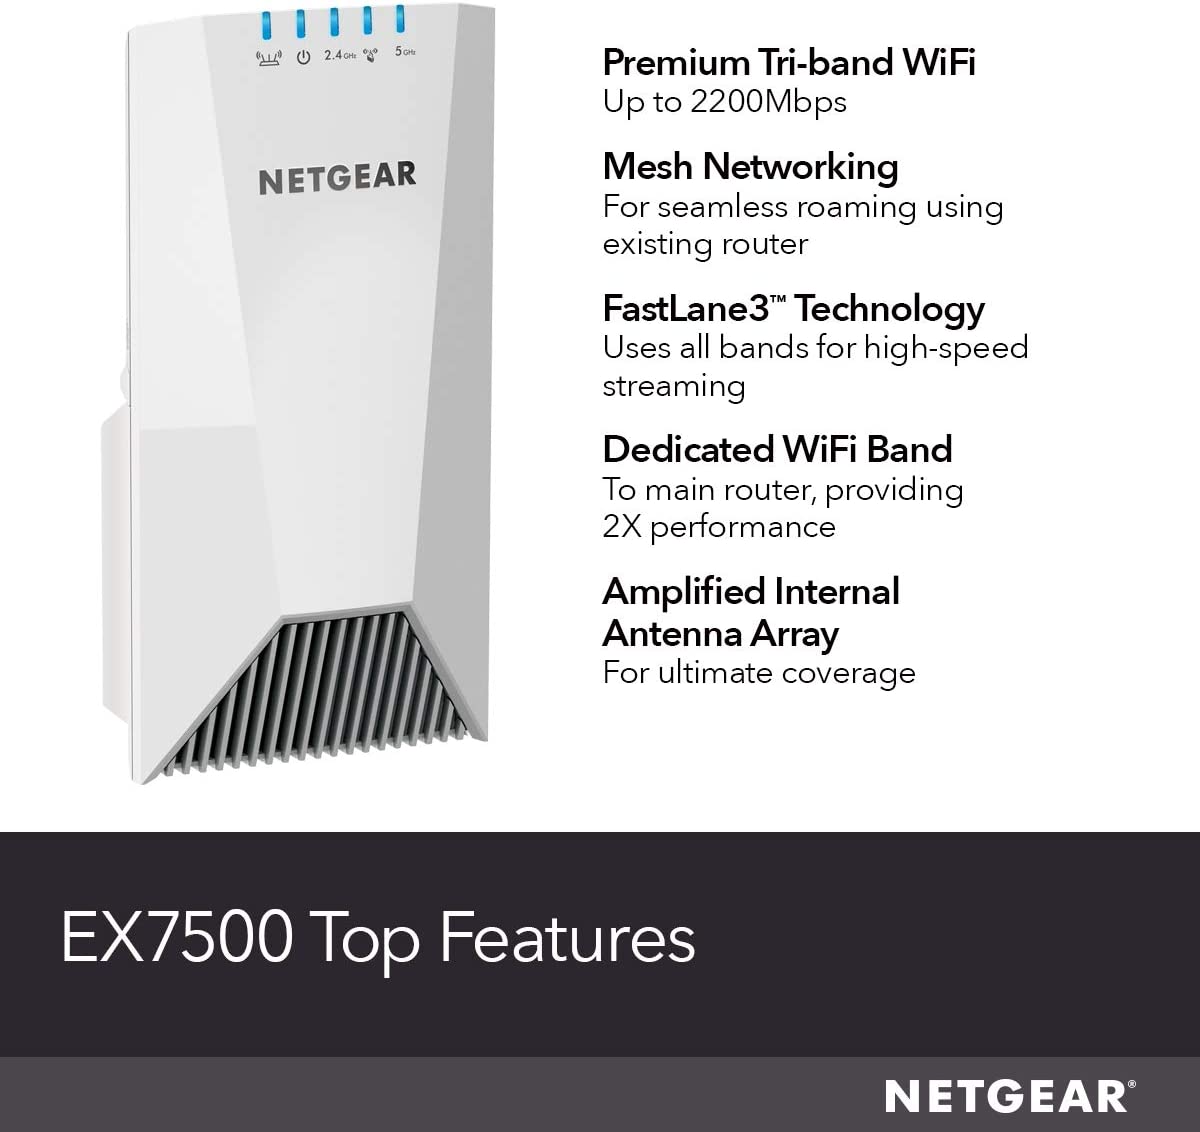 NETGEAR WiFi Mesh Range Extender EX7500 - Coverage up to 2300 sq.ft. and 45 devices with AC2200 Tri-Band Wireless Signal Booster & Repeater